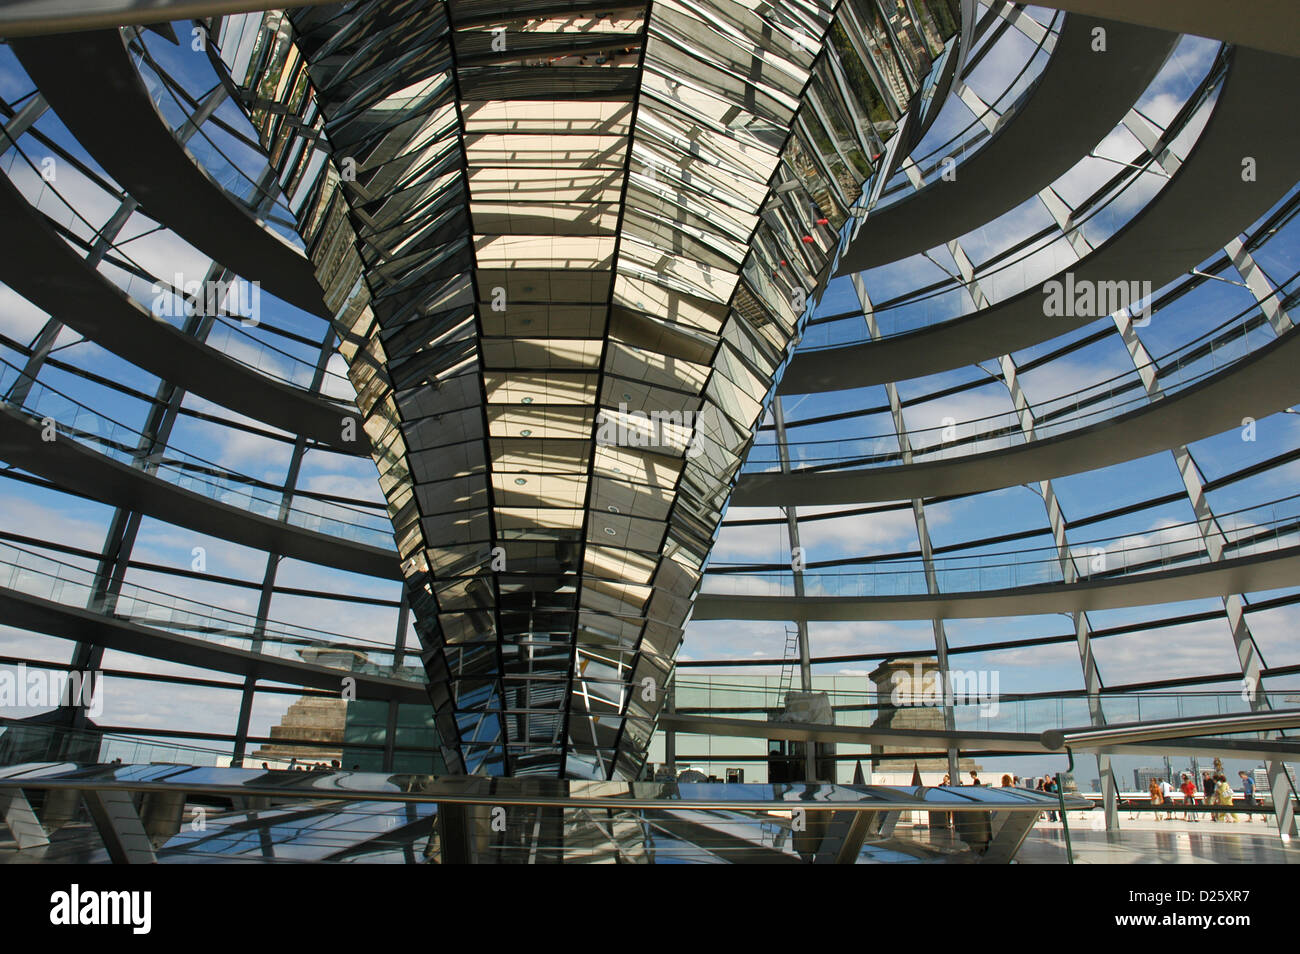 Dome of the Reichstag, seat of the German Parliament, designed by Norman Foster (b.1935). Interior. Berlin. Germany. Stock Photo